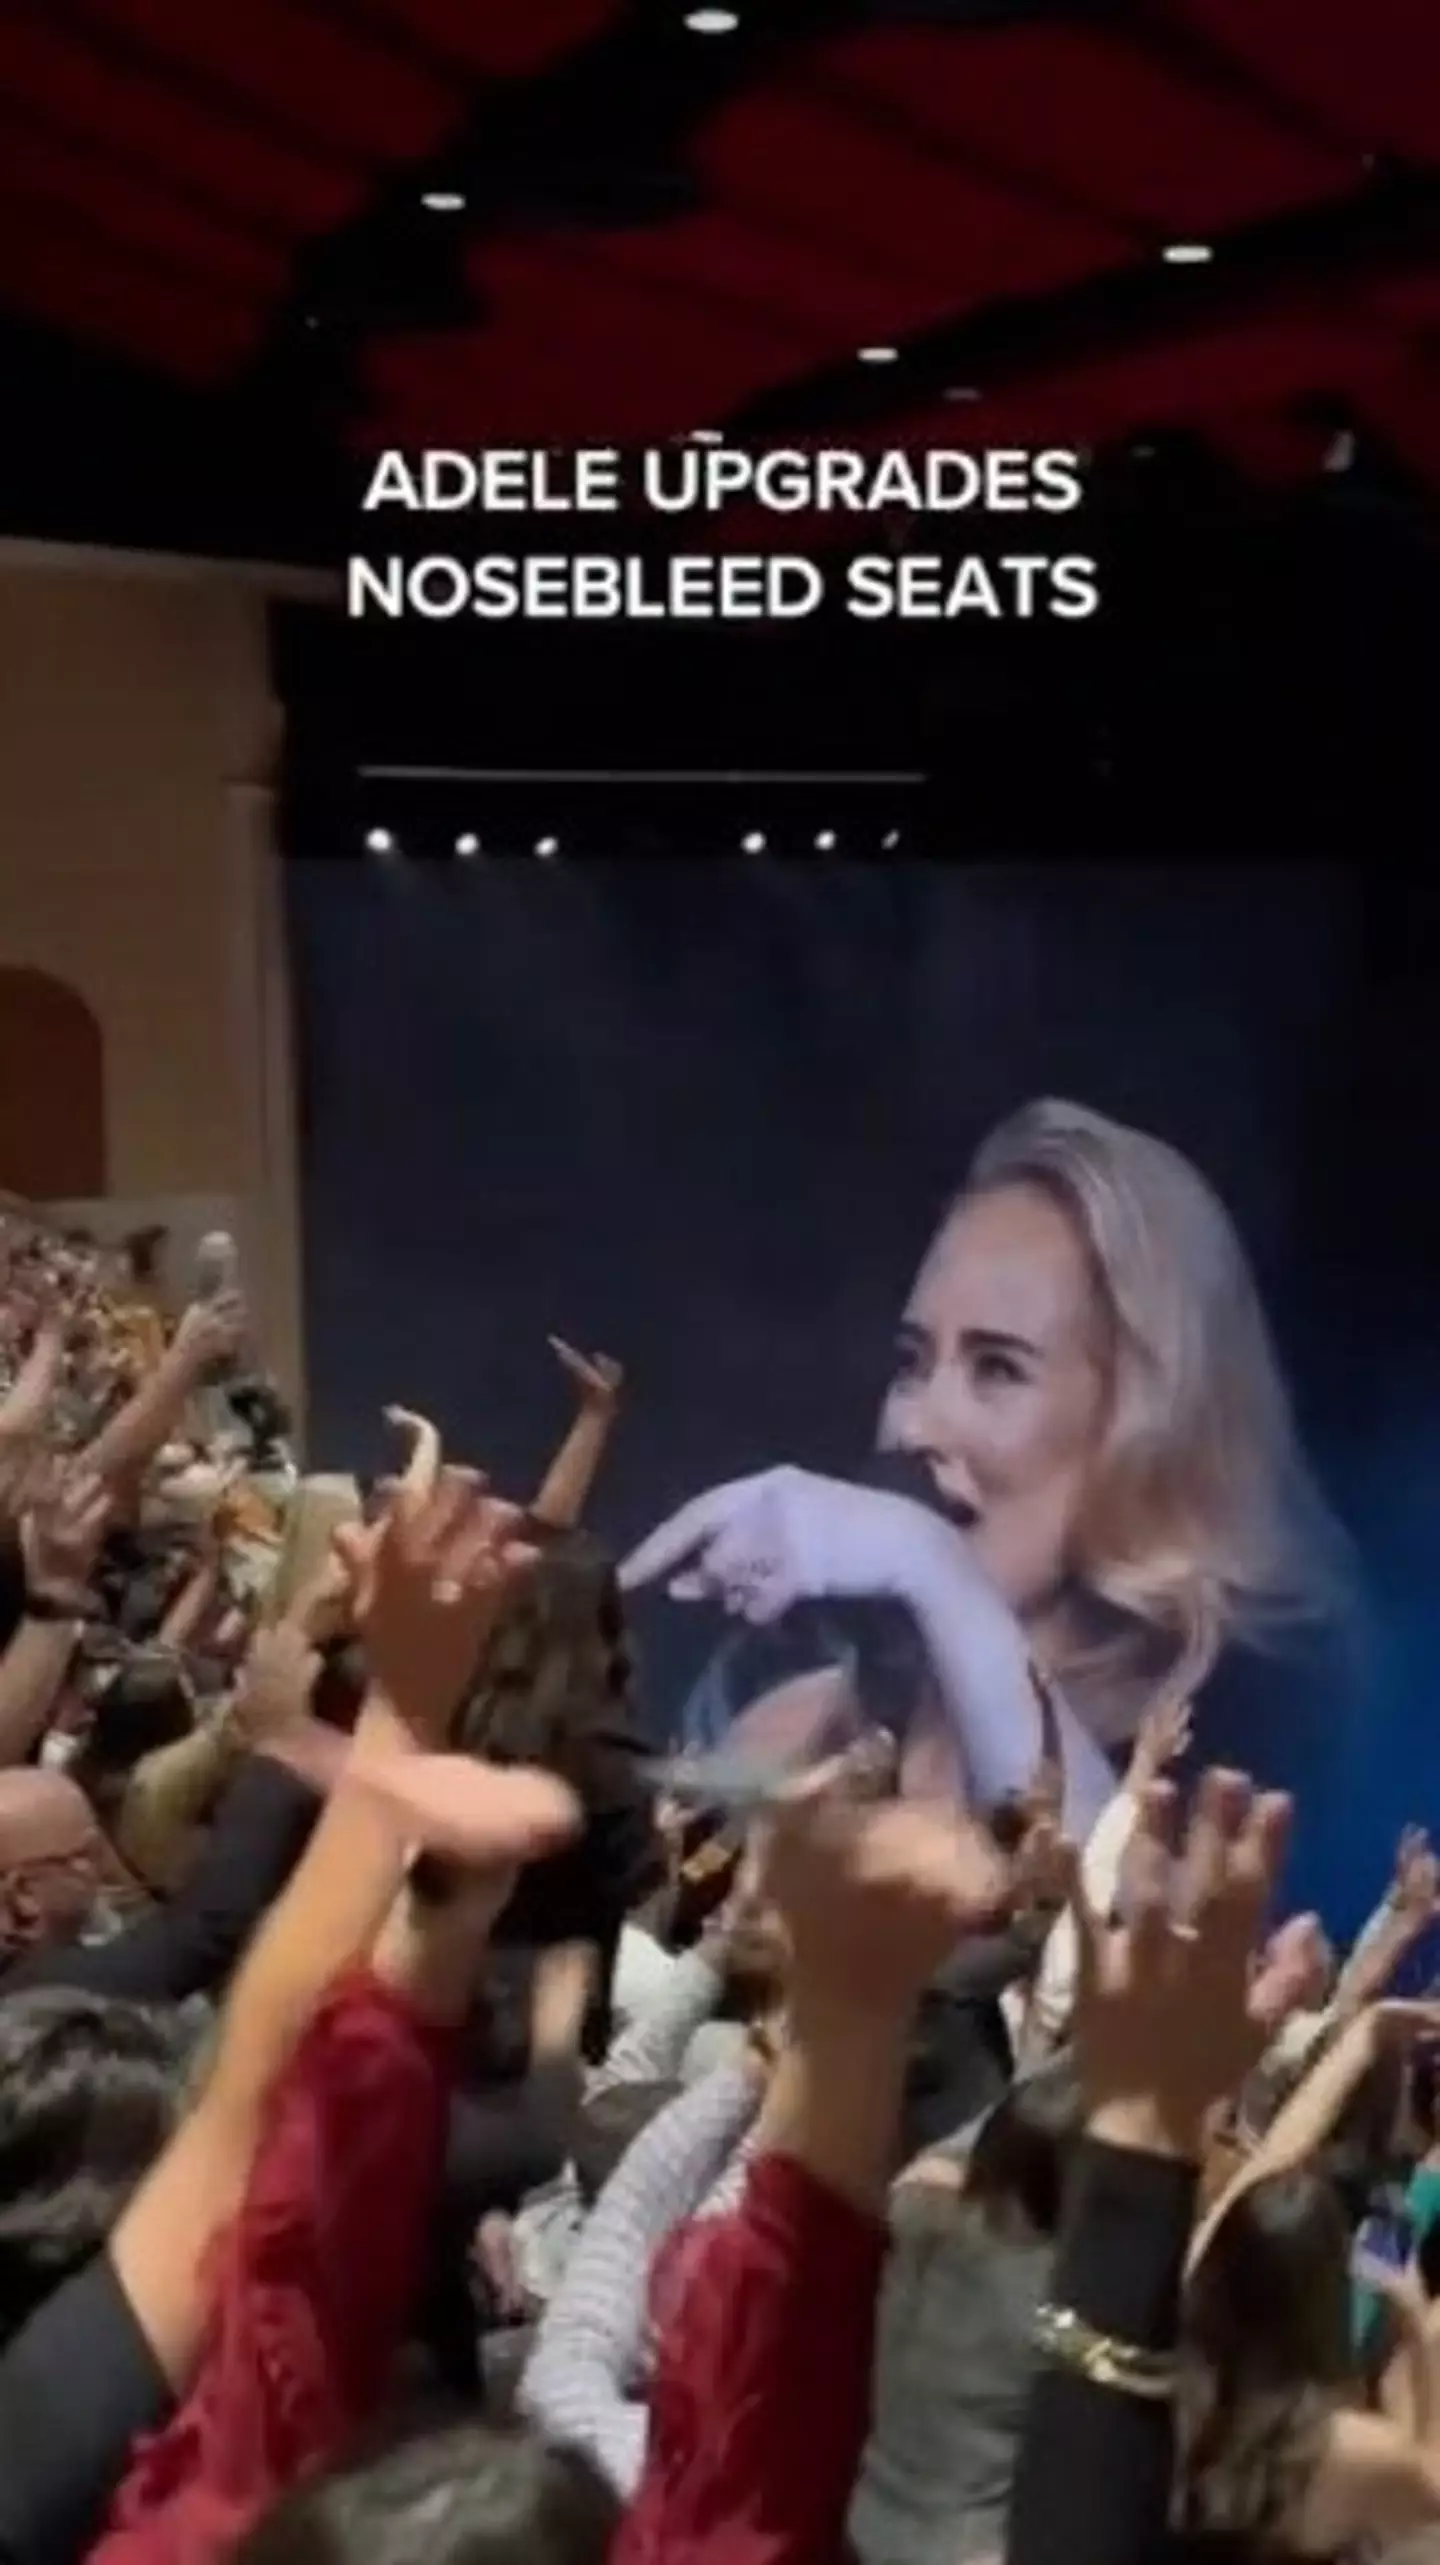 Adele generously allowed two fans who were seated at the very back to enjoy the front row experience.